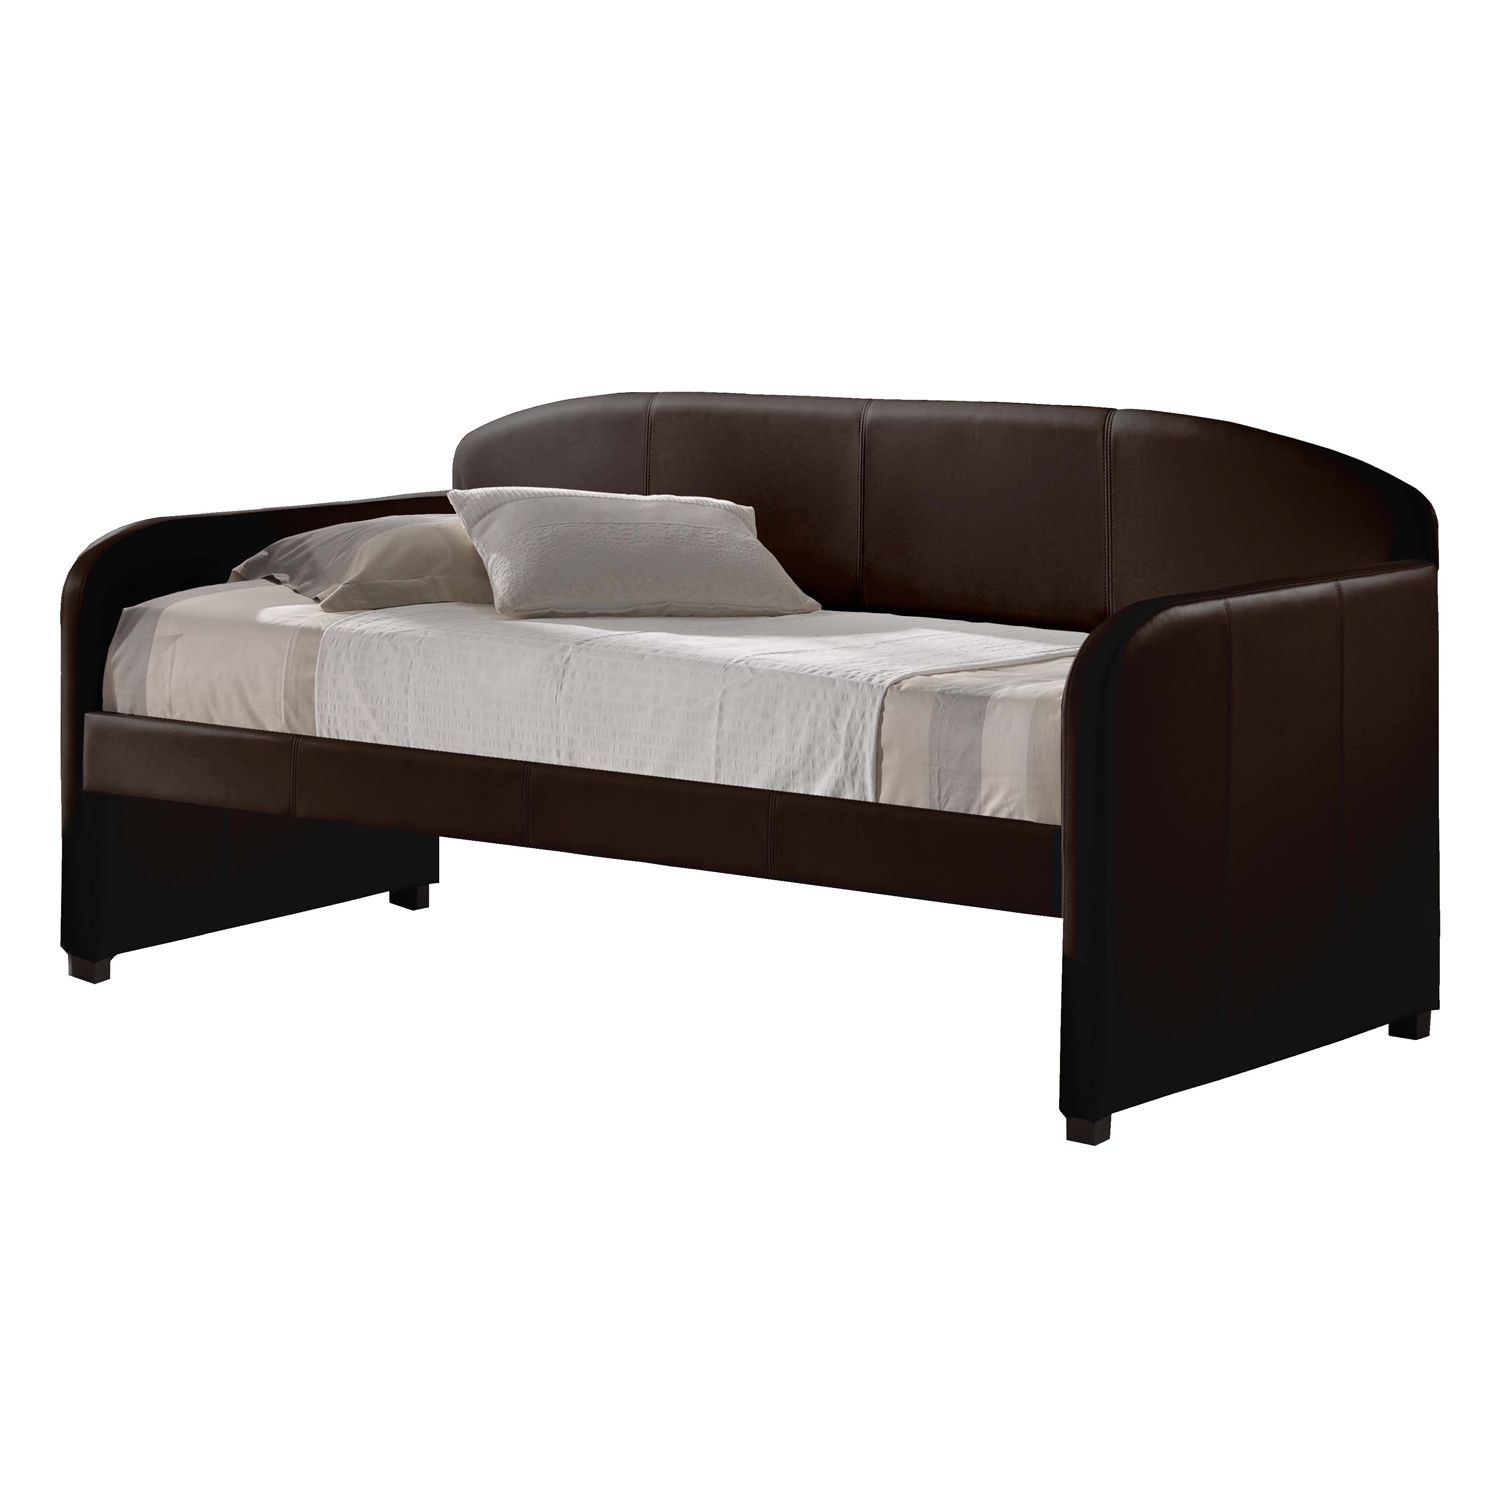 Image for Hillsdale Furniture Springfield Daybed at Kohl's.